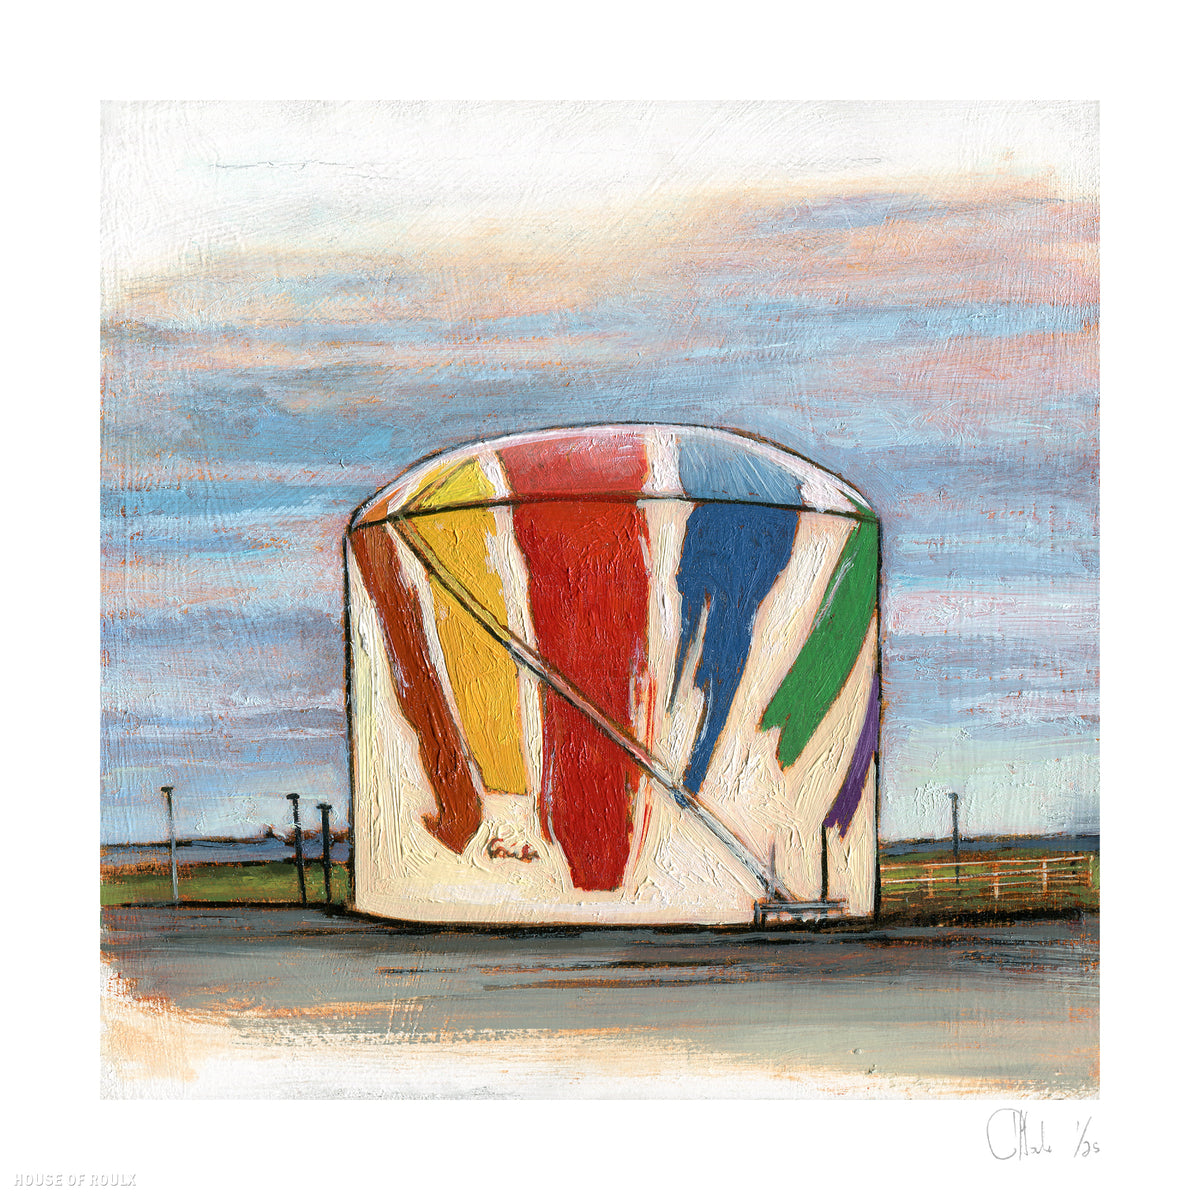 Andrew Houle &quot;Gas Tank / After Corita&quot; - Archival Print, Limited Edition of 25 - 12 x 12&quot;